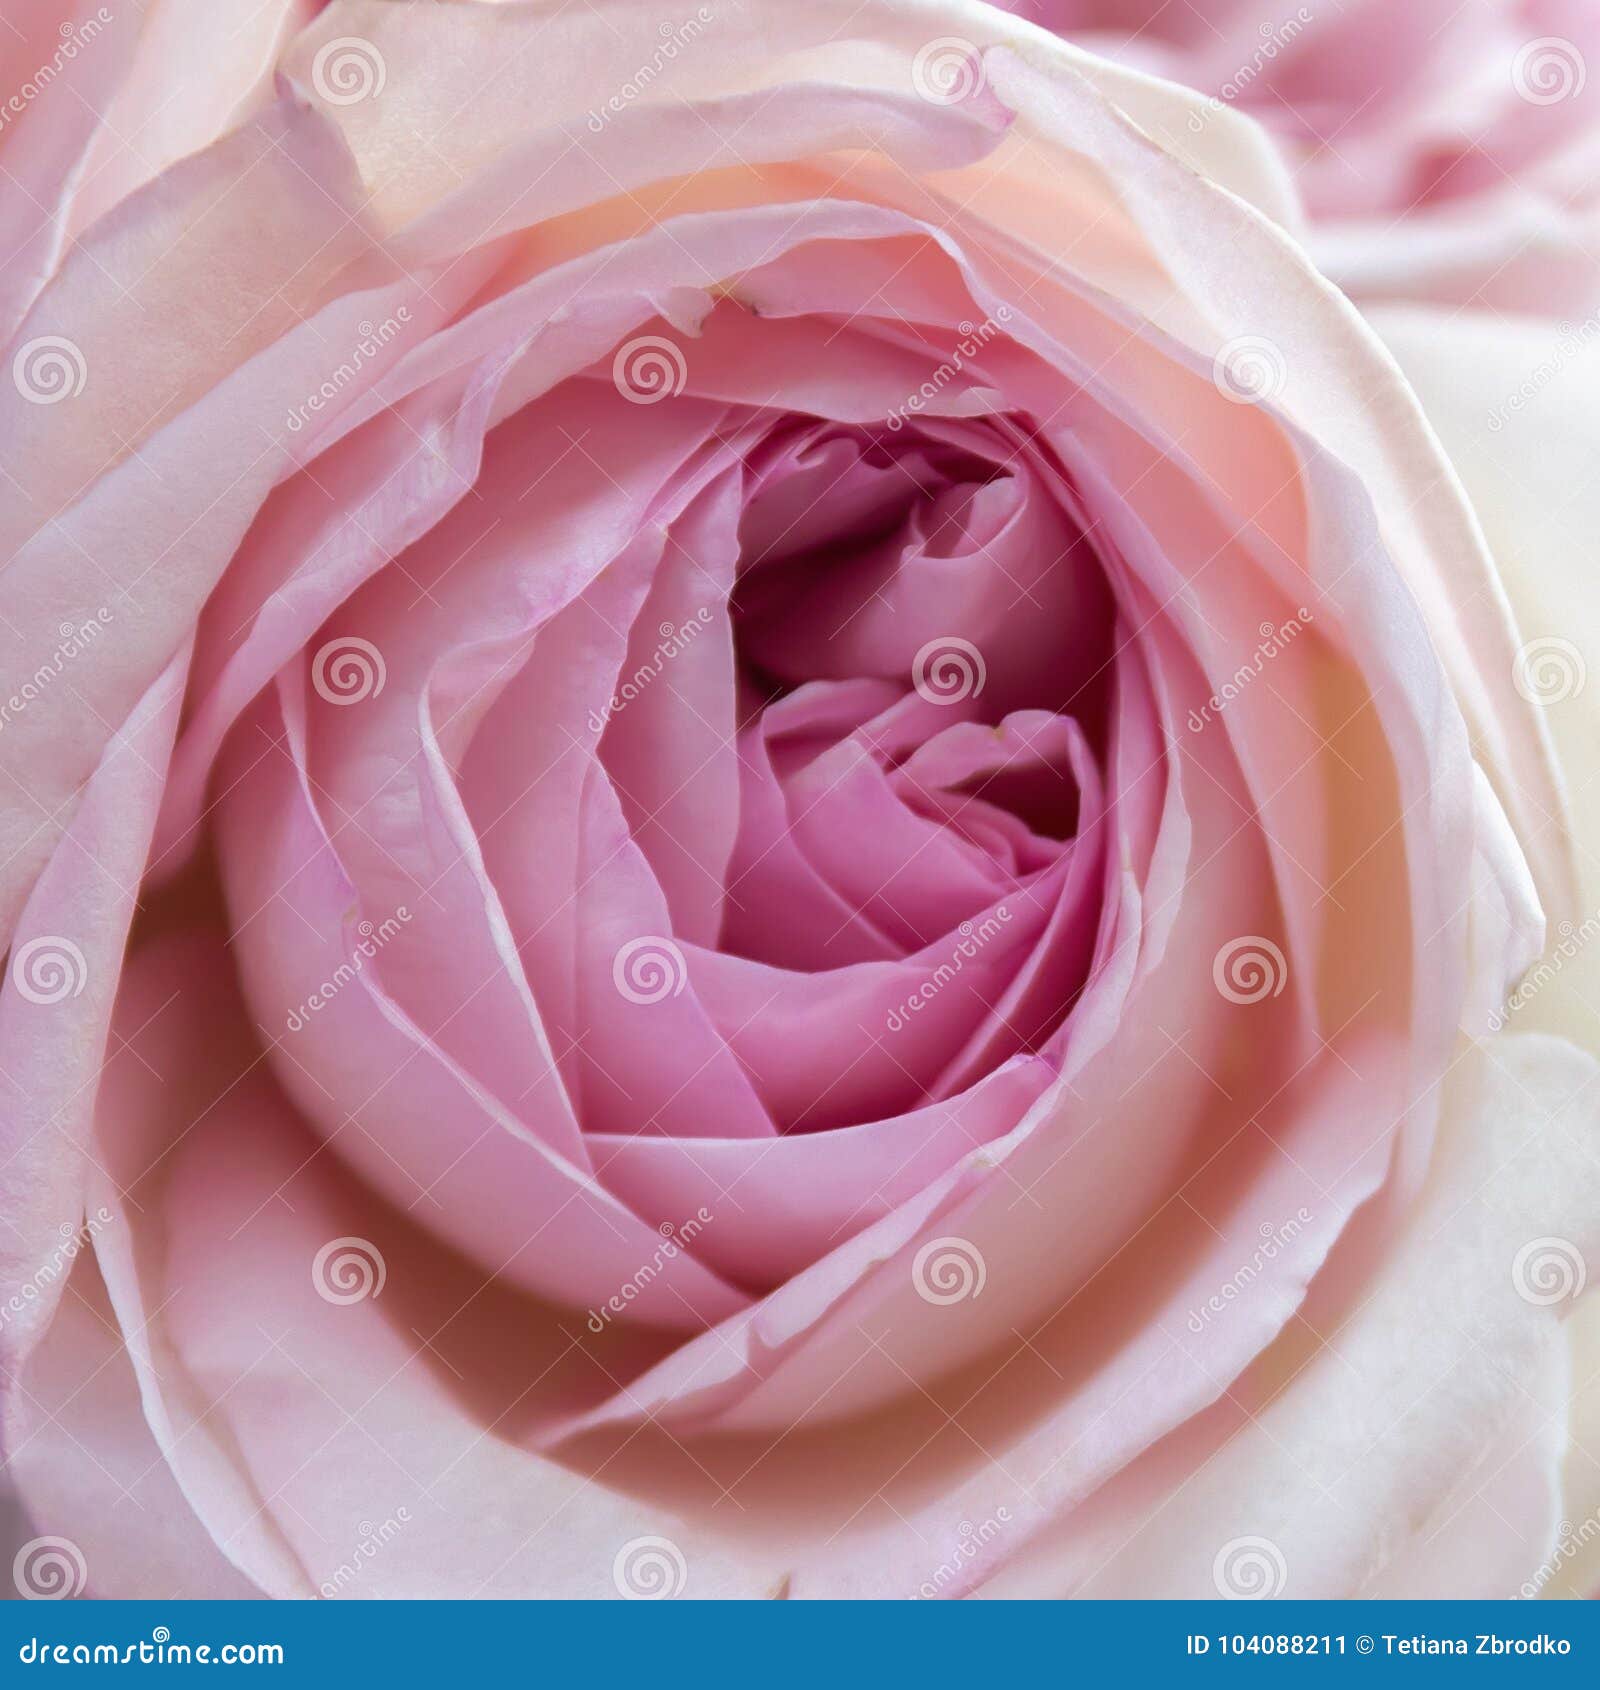 Pink Rose Close Up Stock Image Image Of Head Bloom